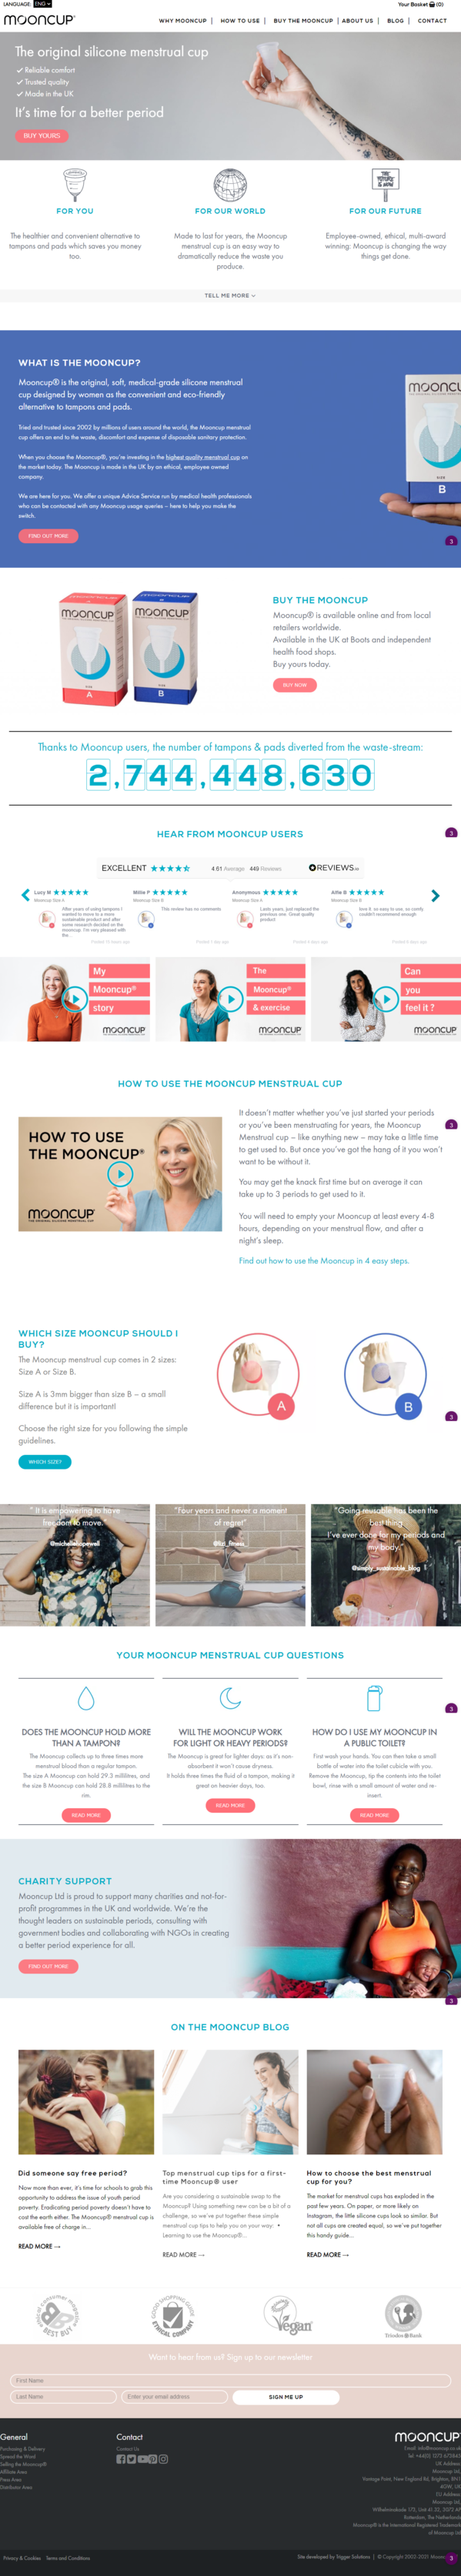 - Mooncup Menstrual Cup - The Original Silicone Cup - www.mooncup.co.uk.png